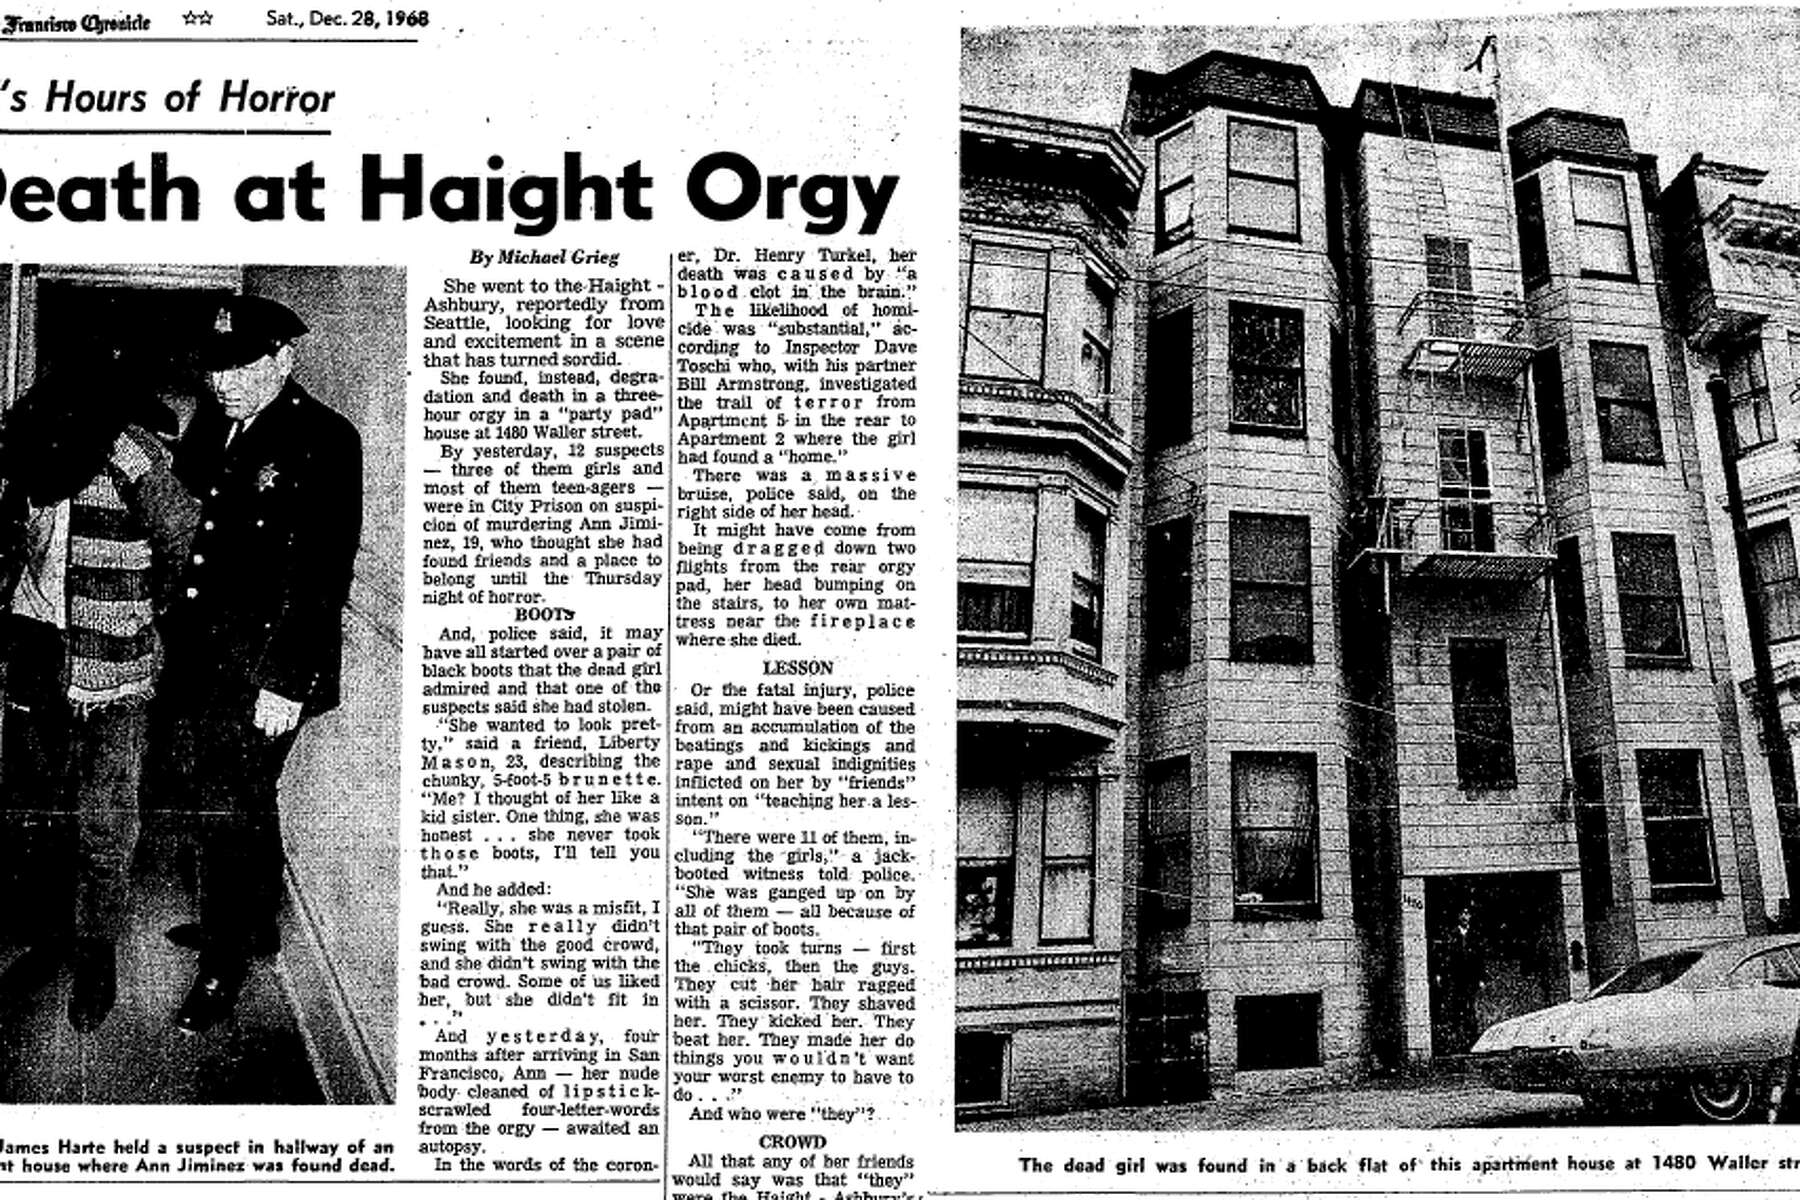 Death at Haight orgy The 1969 San Francisco murder trial with many witnesses but no convictions